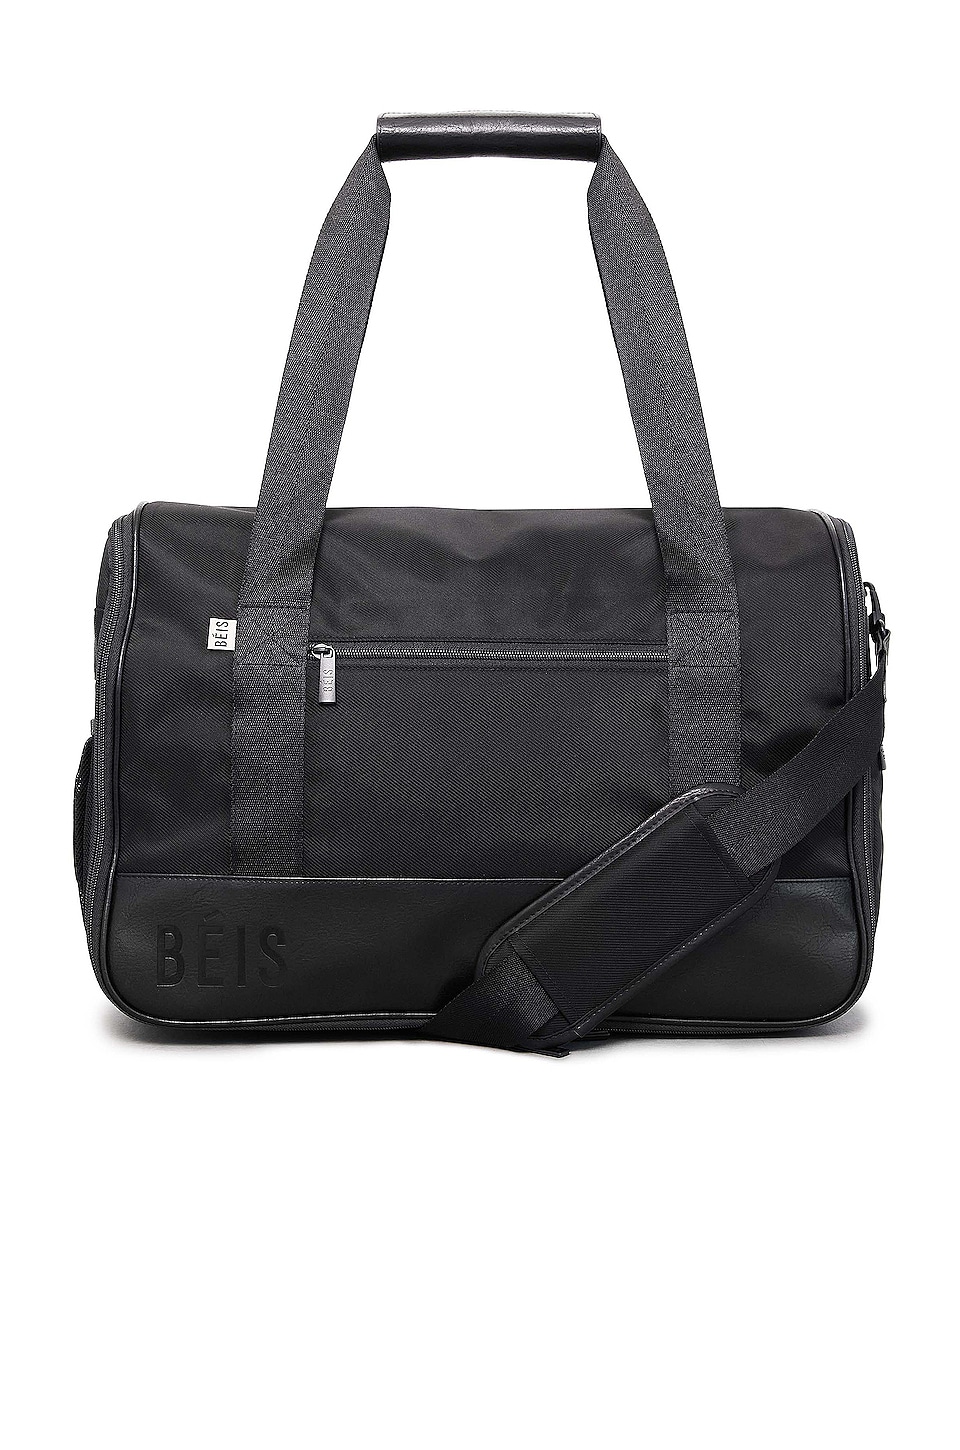 BEIS The Hanging Duffle Black